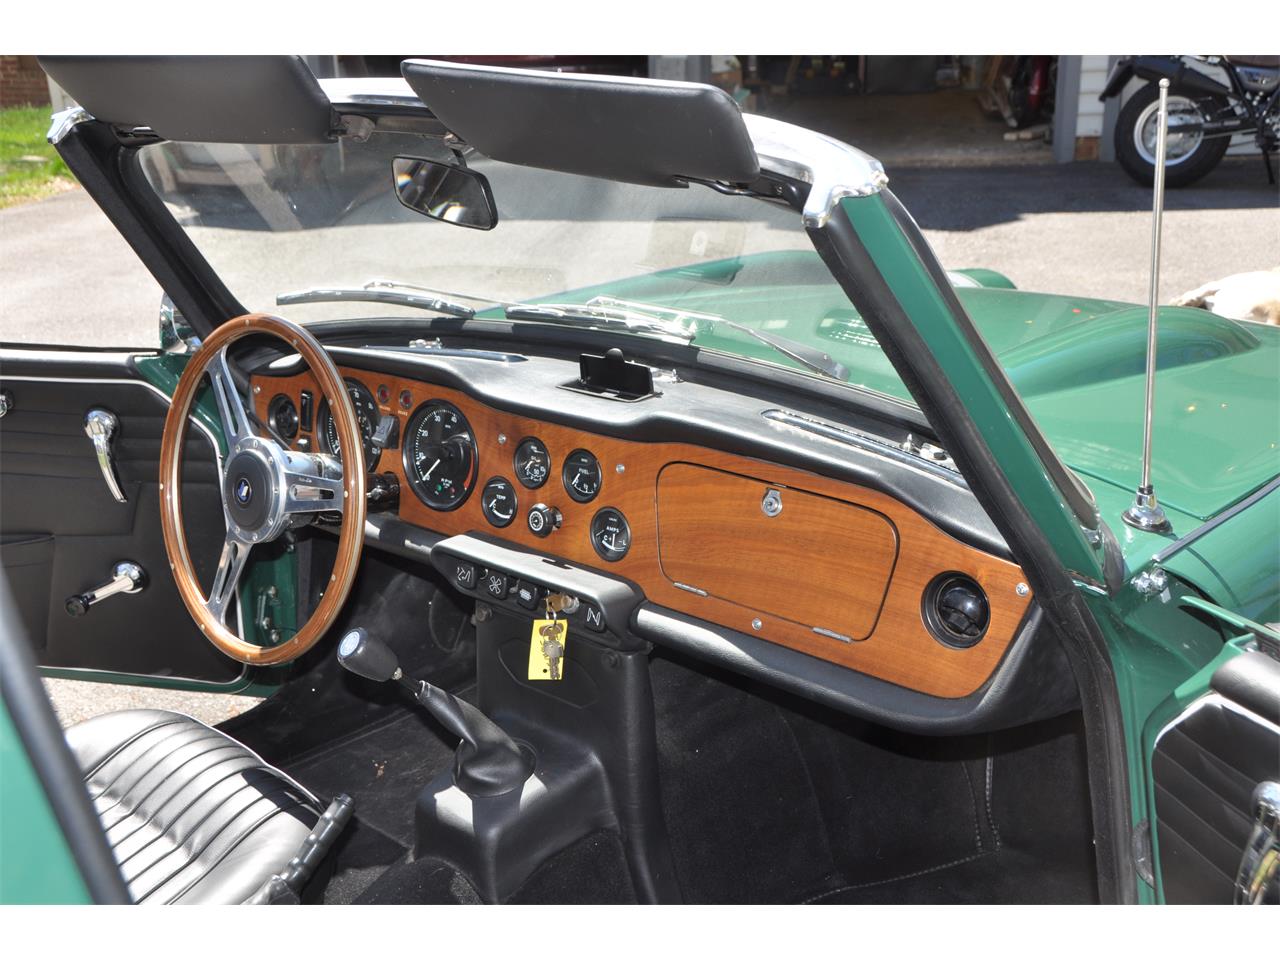 1968 Triumph TR250 for sale in Greenbelt, MD – photo 63